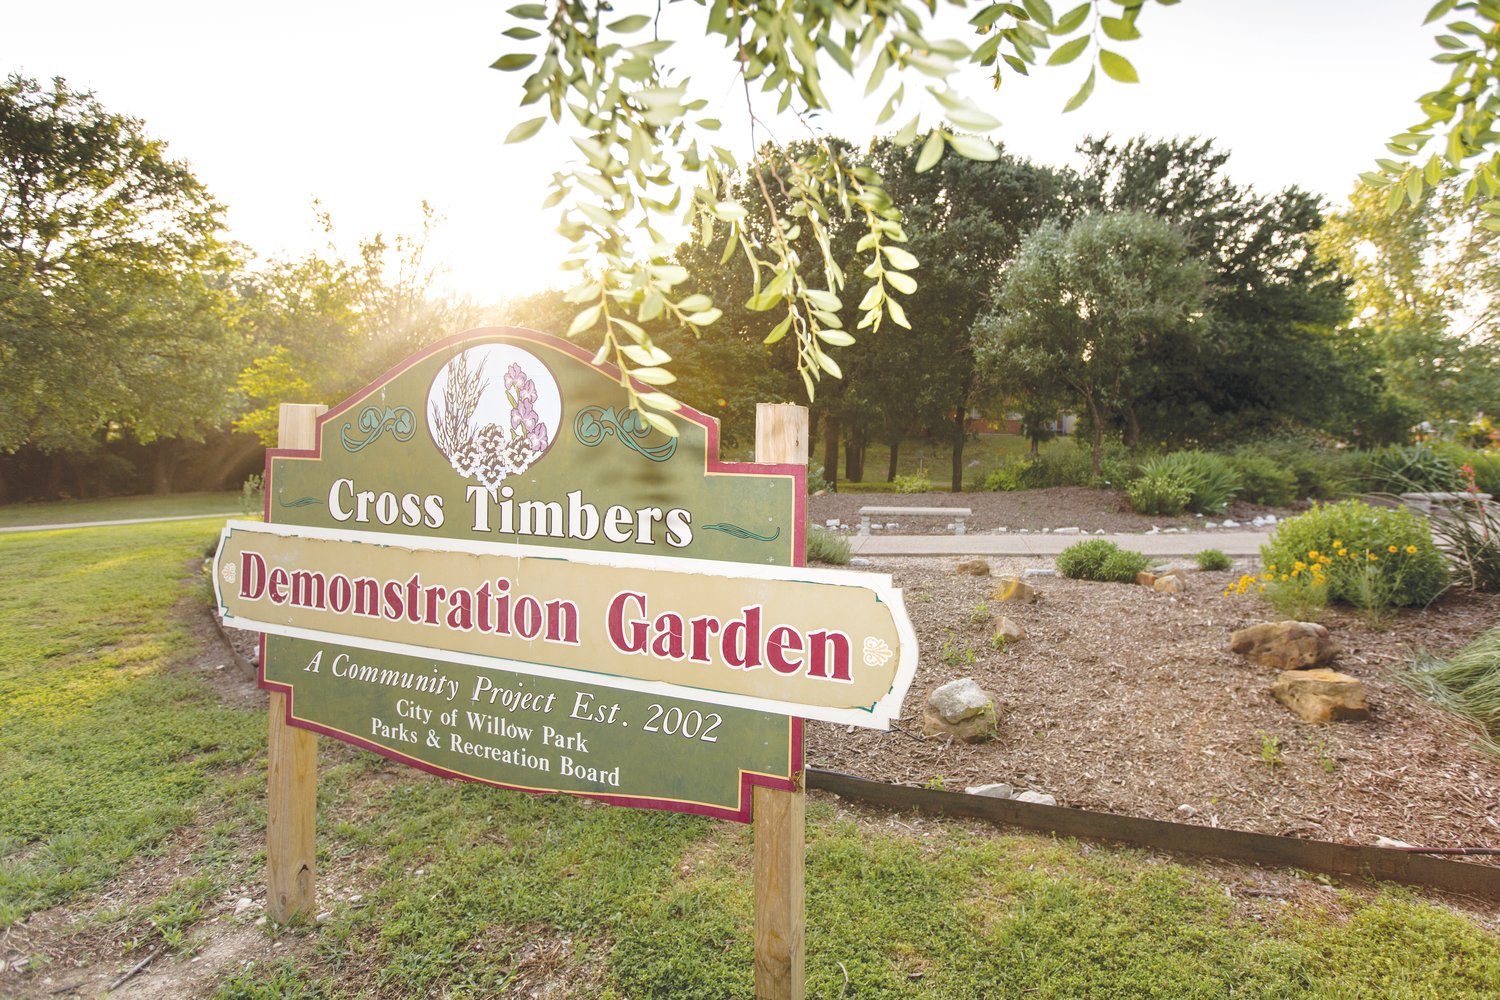 The Cross Timbers Demonstration Garden consists of berms, walkways, benches, vines, trees and other plants. Started as a community project in 2002, the Parker County Master Gardeners now maintain the garden.